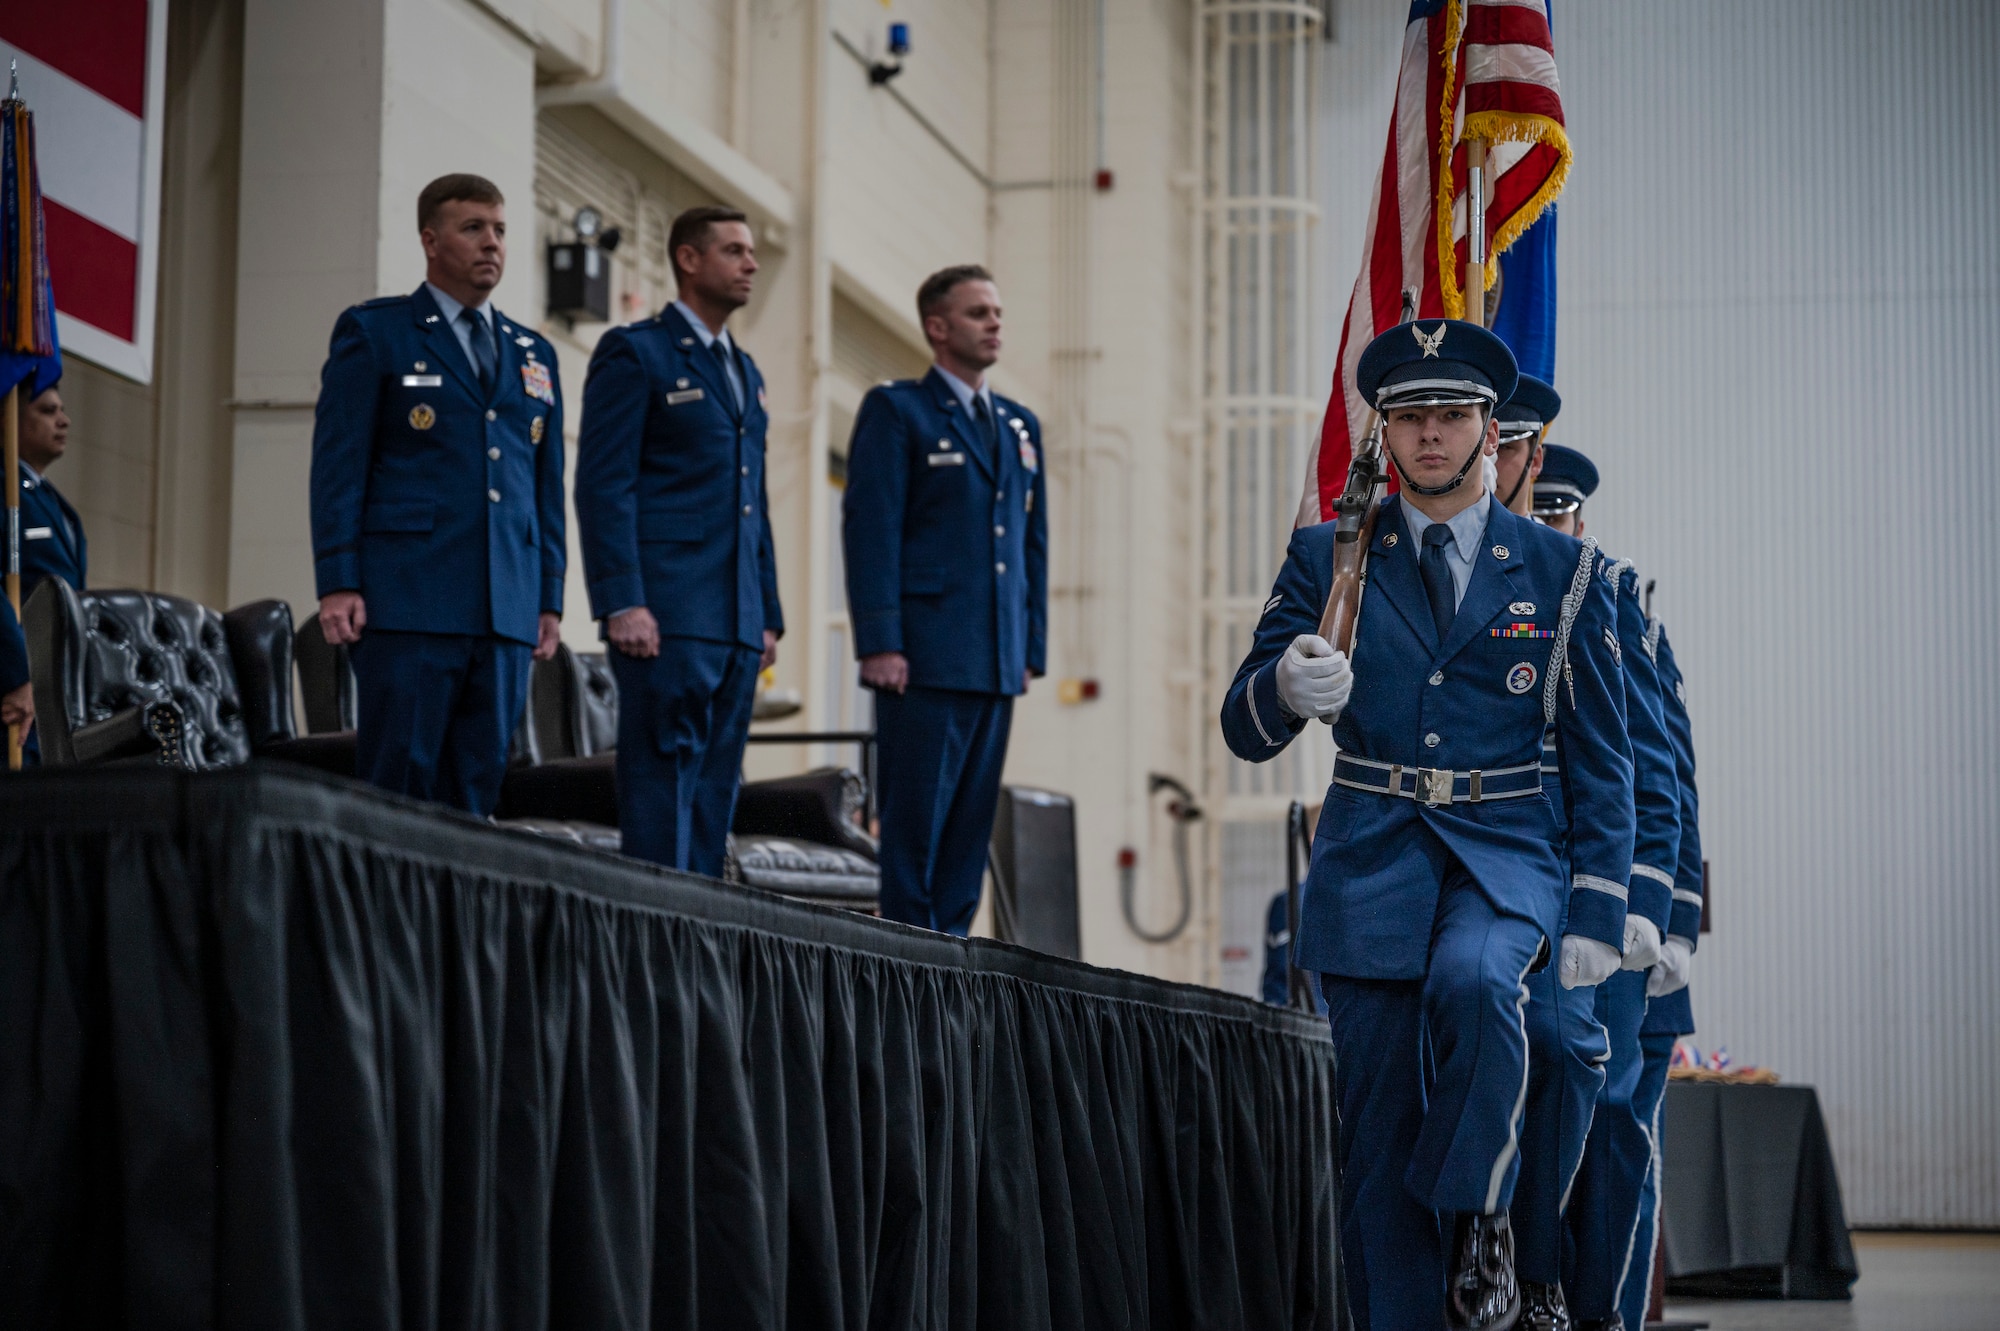 Dyess honor guardsmen post the colors during the 40th Airlift Squadron change of command ceremony at Dyess Air Force Base, Texas, Feb. 3, 2023. The 40th AS supports theater commanders' requirements with combat-delivery capability through tactical airland and airdrop operations as well as humanitarian efforts and aeromedical evacuation. (U.S. Air Force photo by Senior Airman Colin Hollowell)